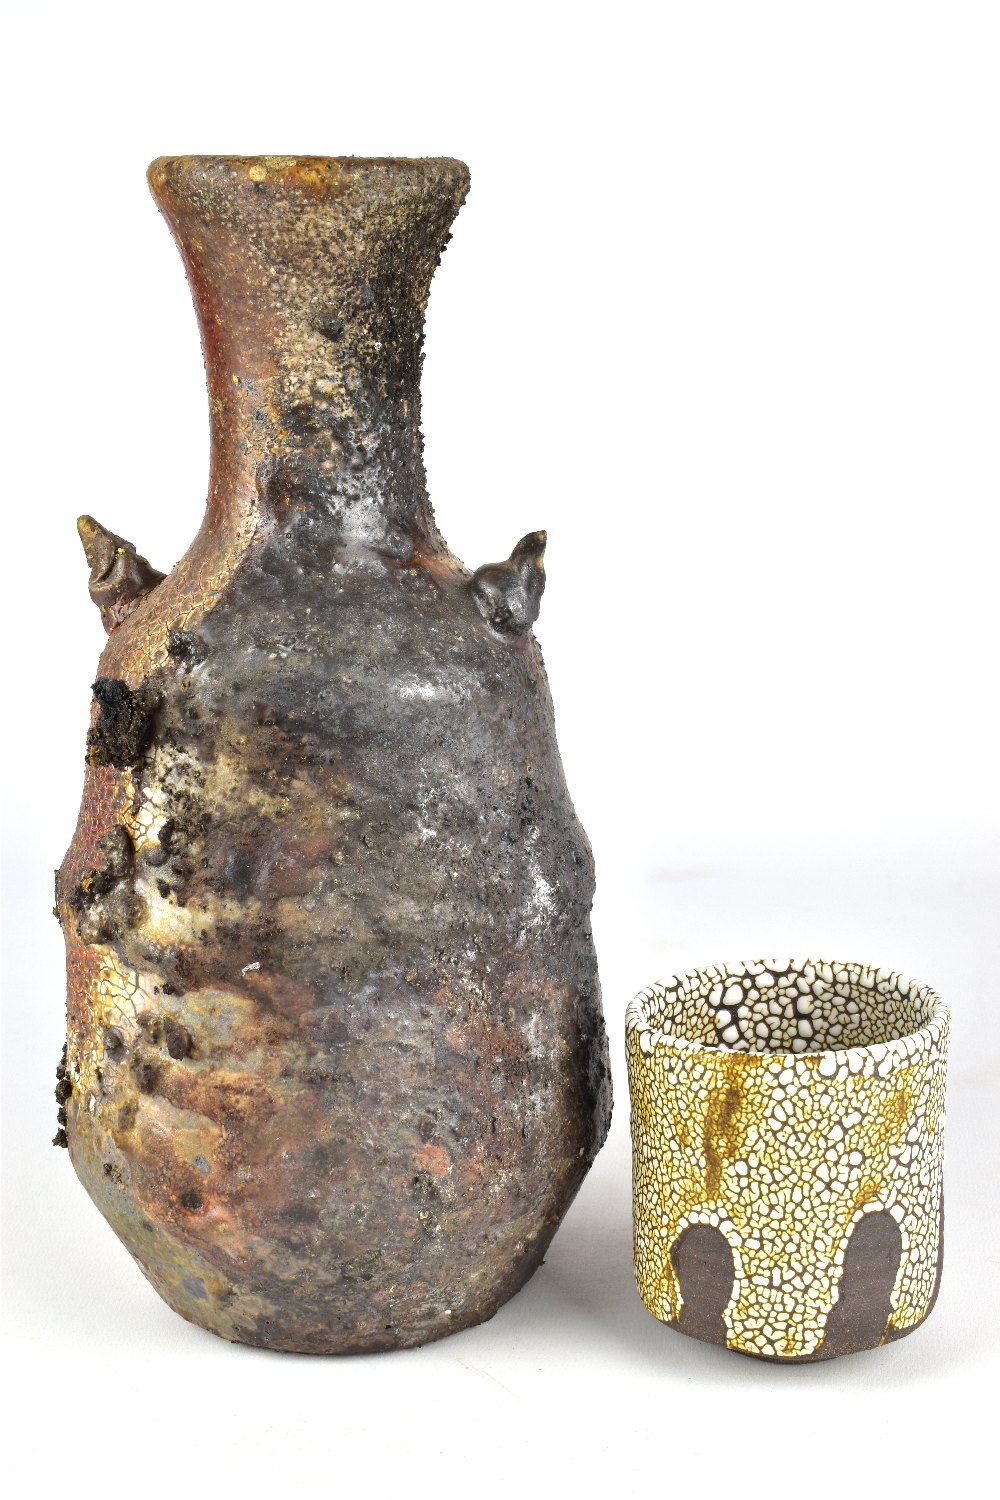 BRENDAN FULLER; a lugged wood fired stoneware bottle with heavily textured surface and a cup,